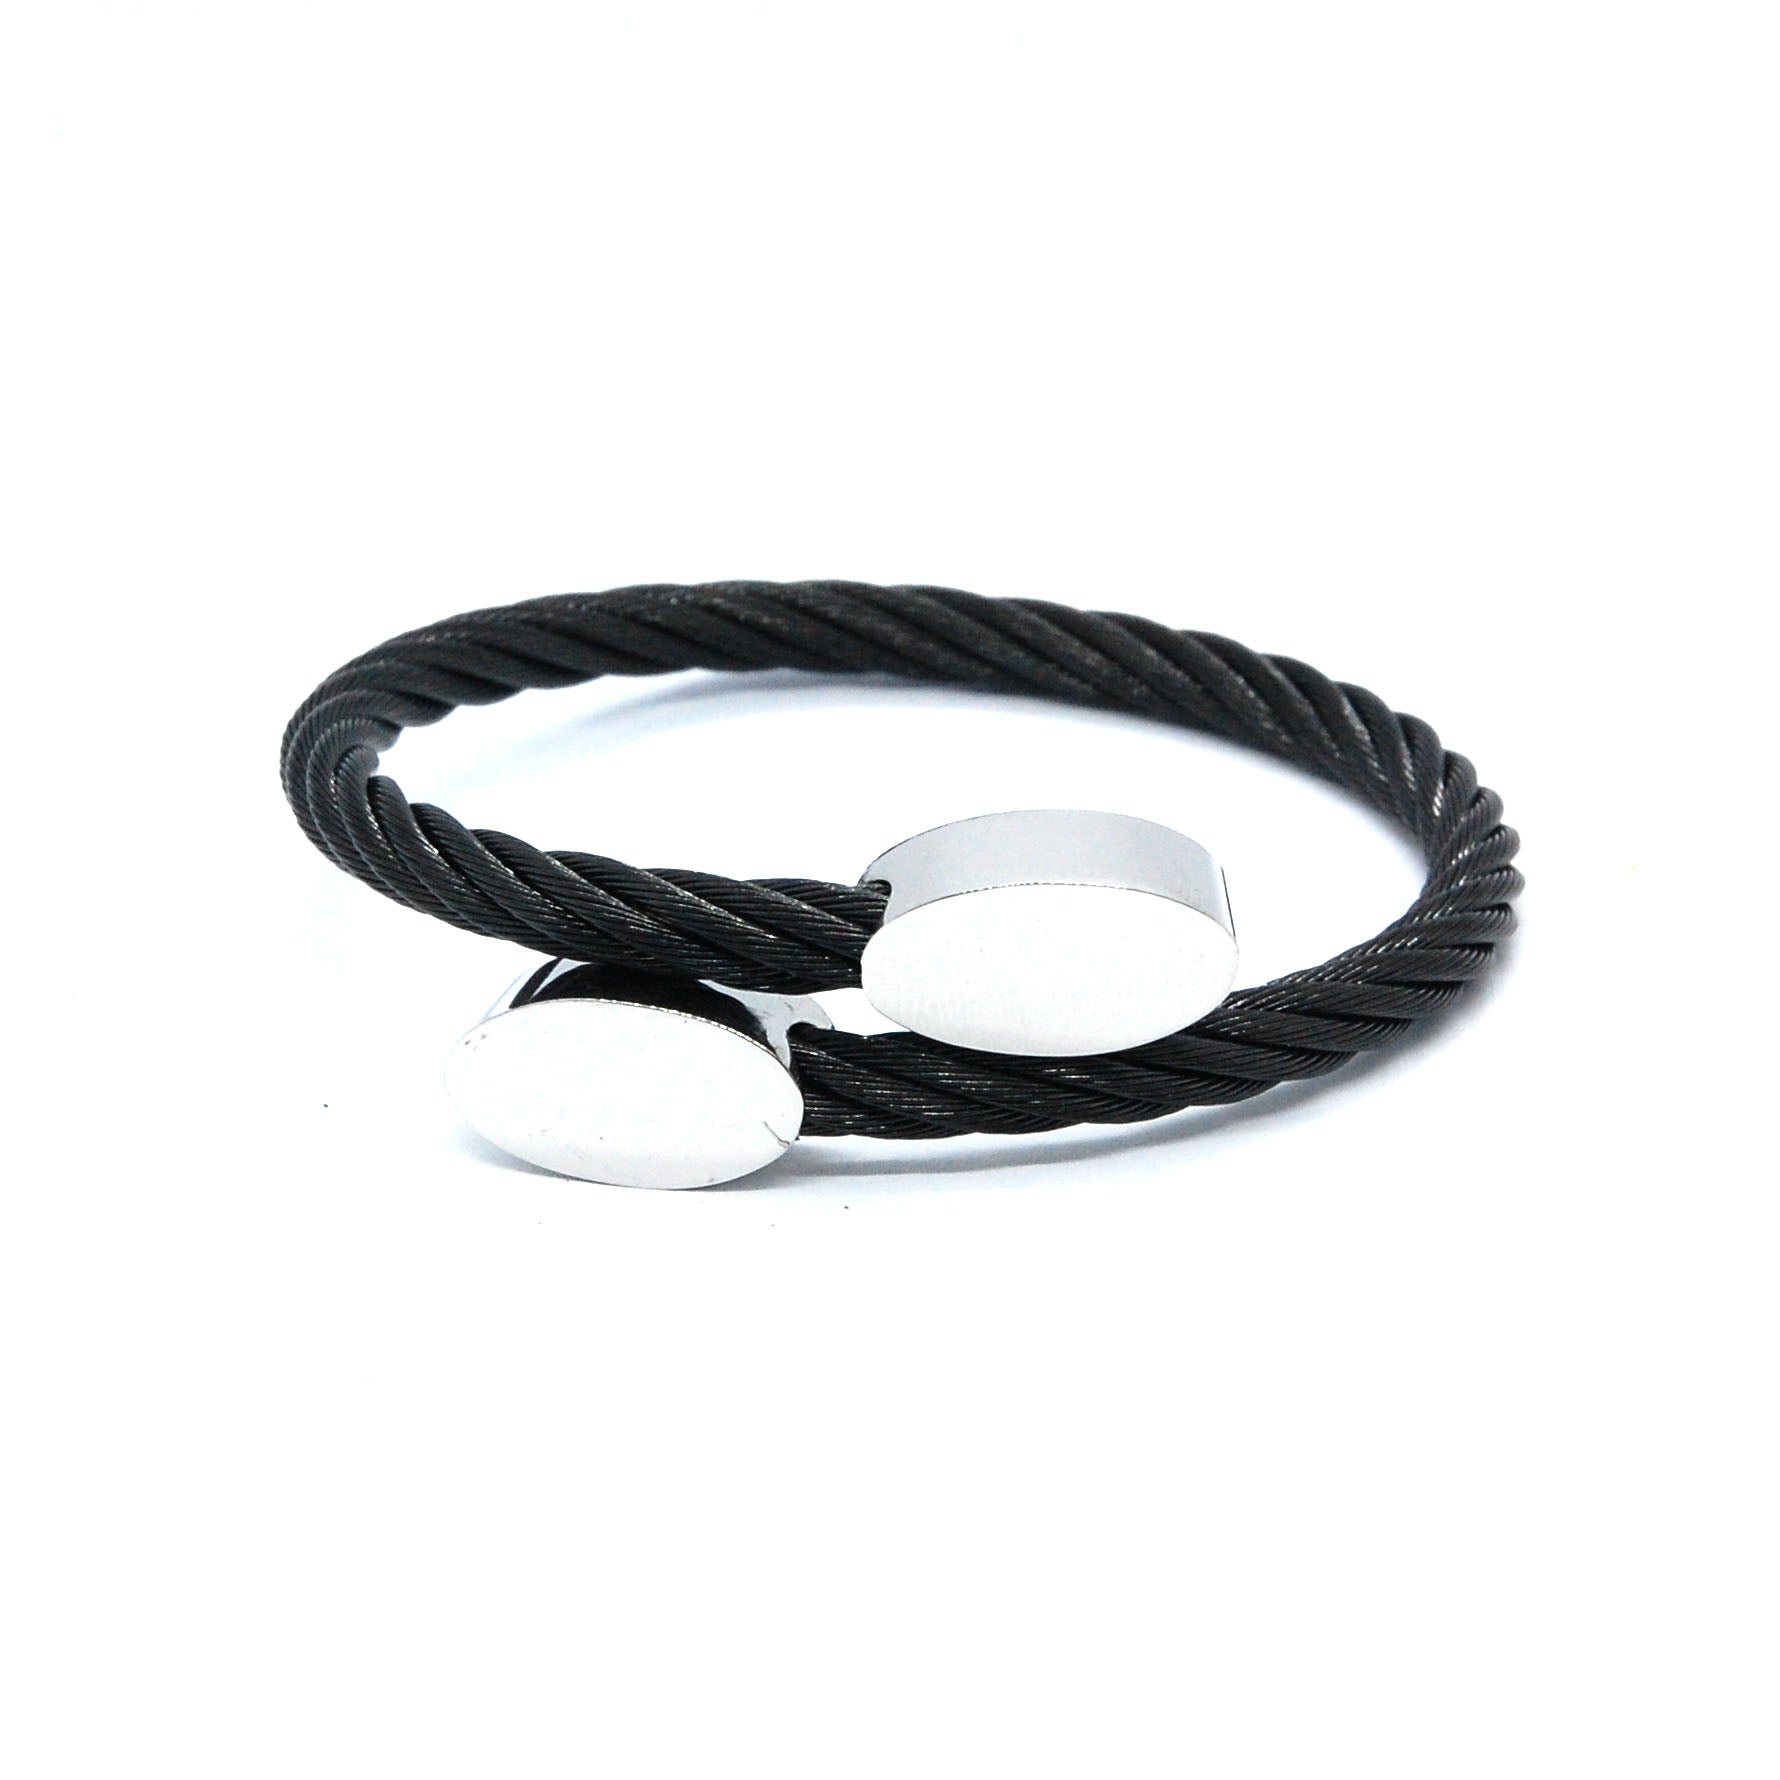 ESBG 6712: All Black Plated Twisted Charriol Bangle w/ White Oval Ends